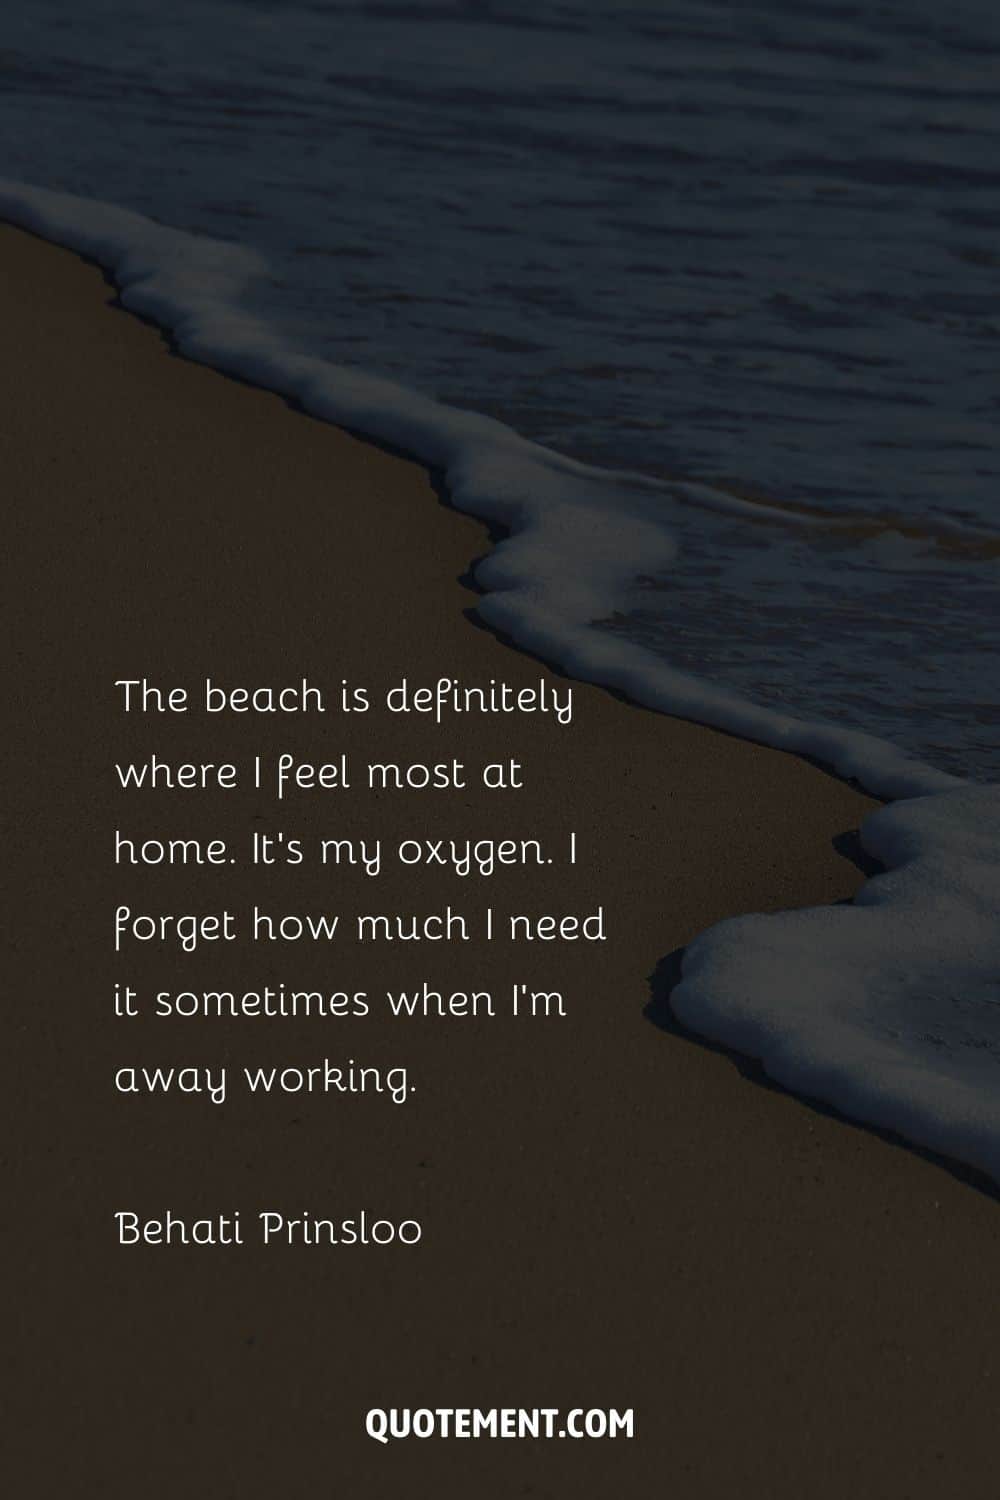 The beach is definitely where I feel most at home. It's my oxygen. I forget how much I need it sometimes when I'm away working. – Behati Prinsloo